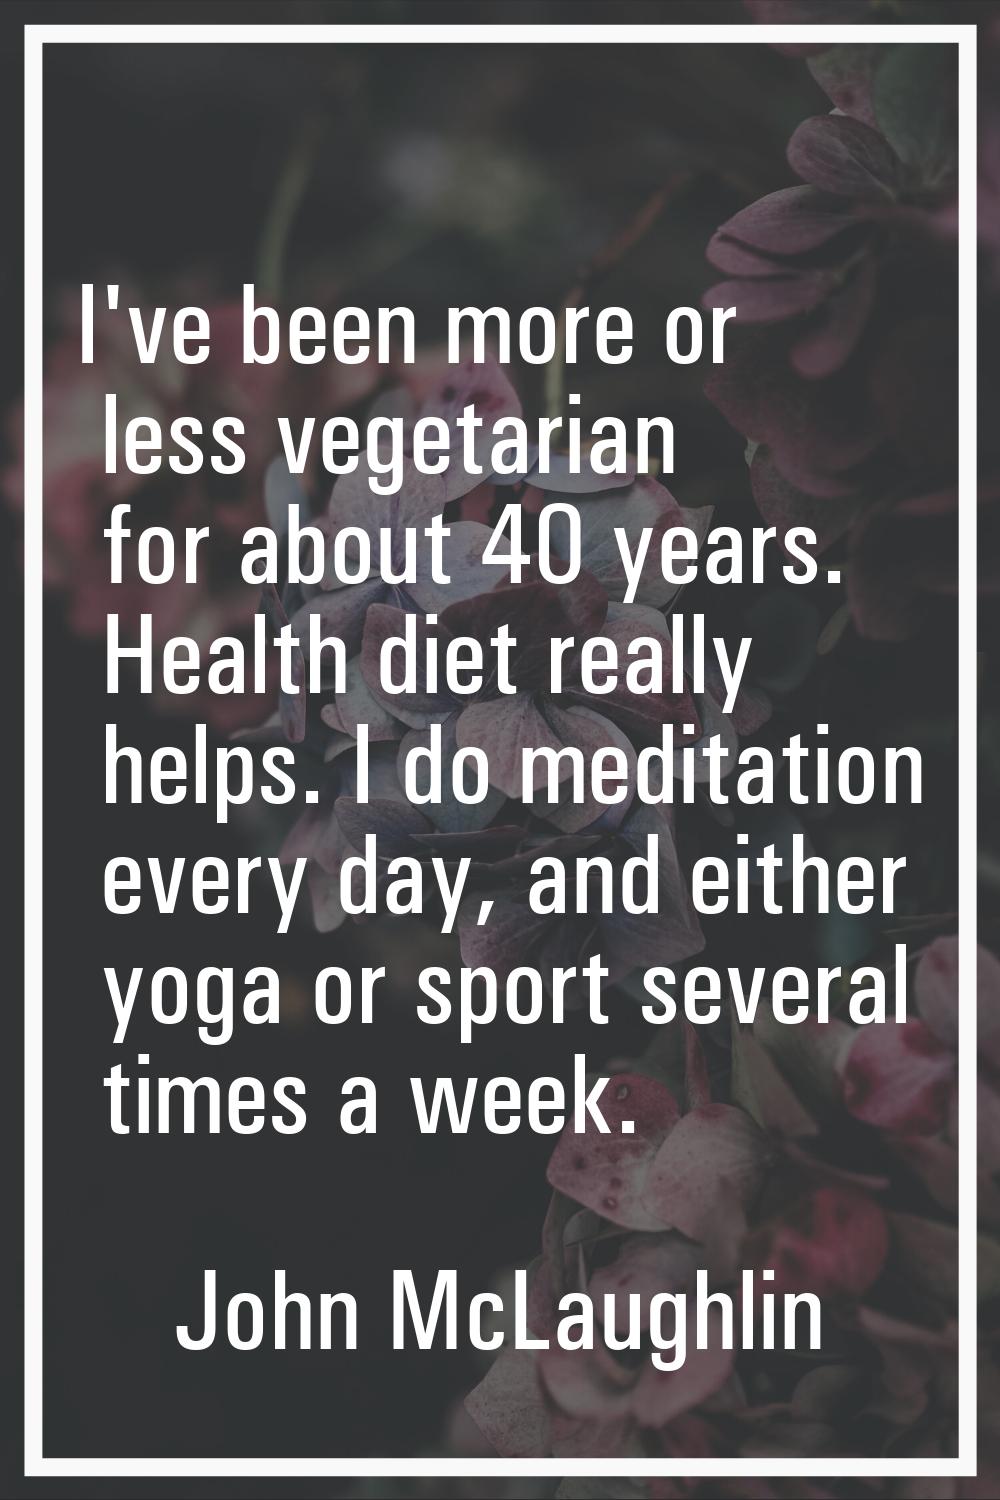 I've been more or less vegetarian for about 40 years. Health diet really helps. I do meditation eve